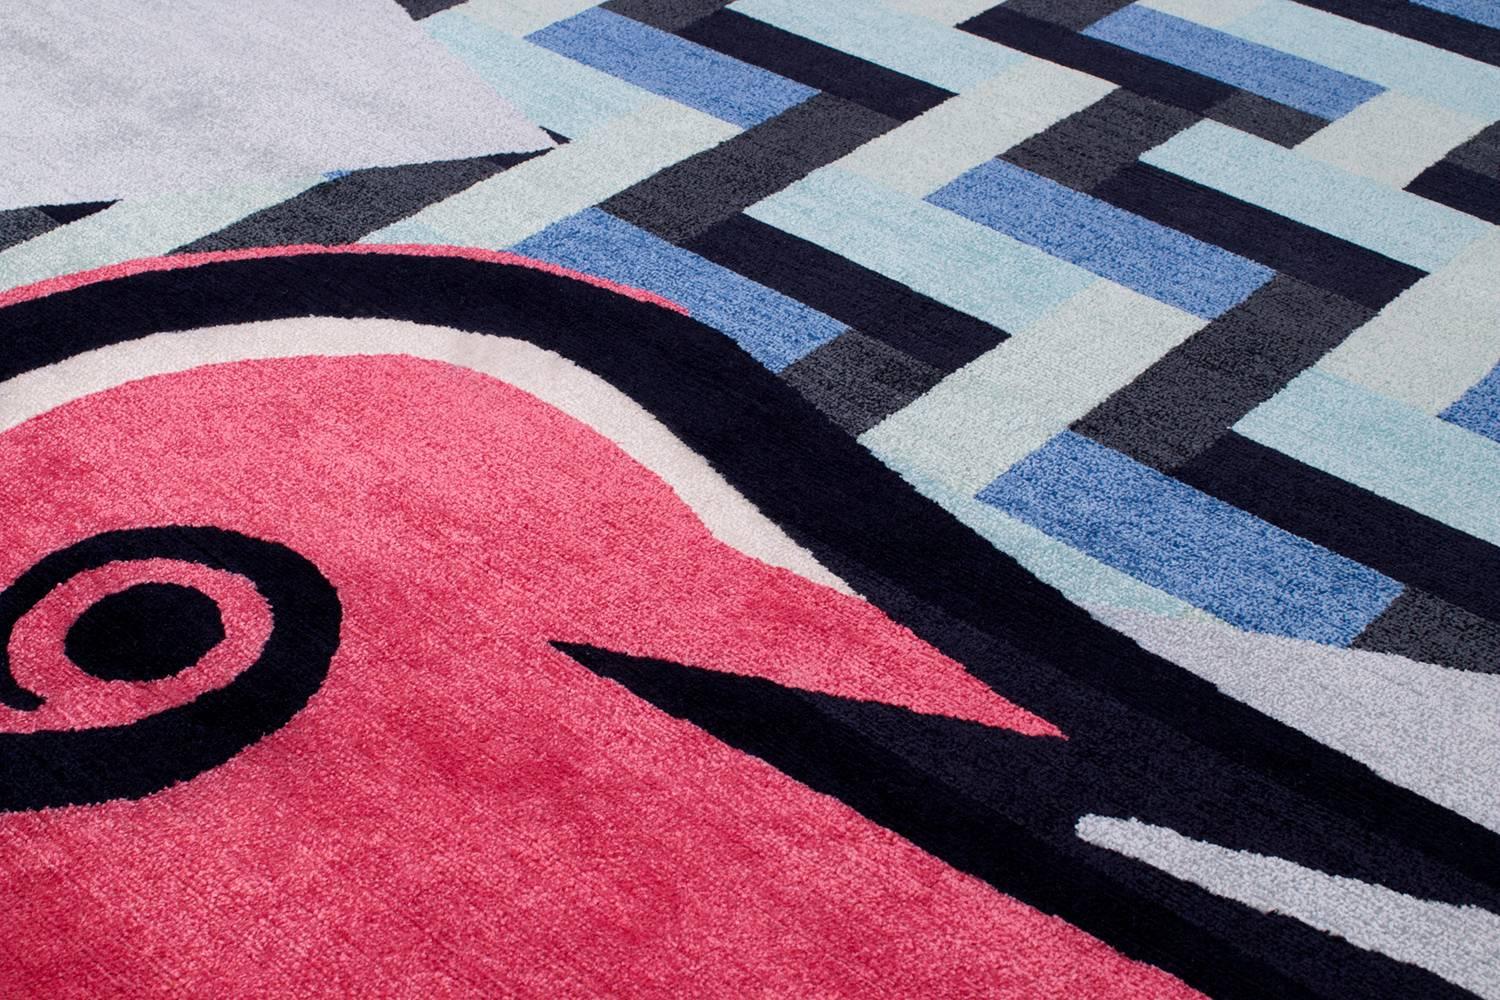 The beautiful Rasuwa is one of four designs in our limited edition 'Earthquake collection' in collaboration with Alessandro Mendini. These special limited edition carpets were woven by a select team of female weavers who trained with weaving masters